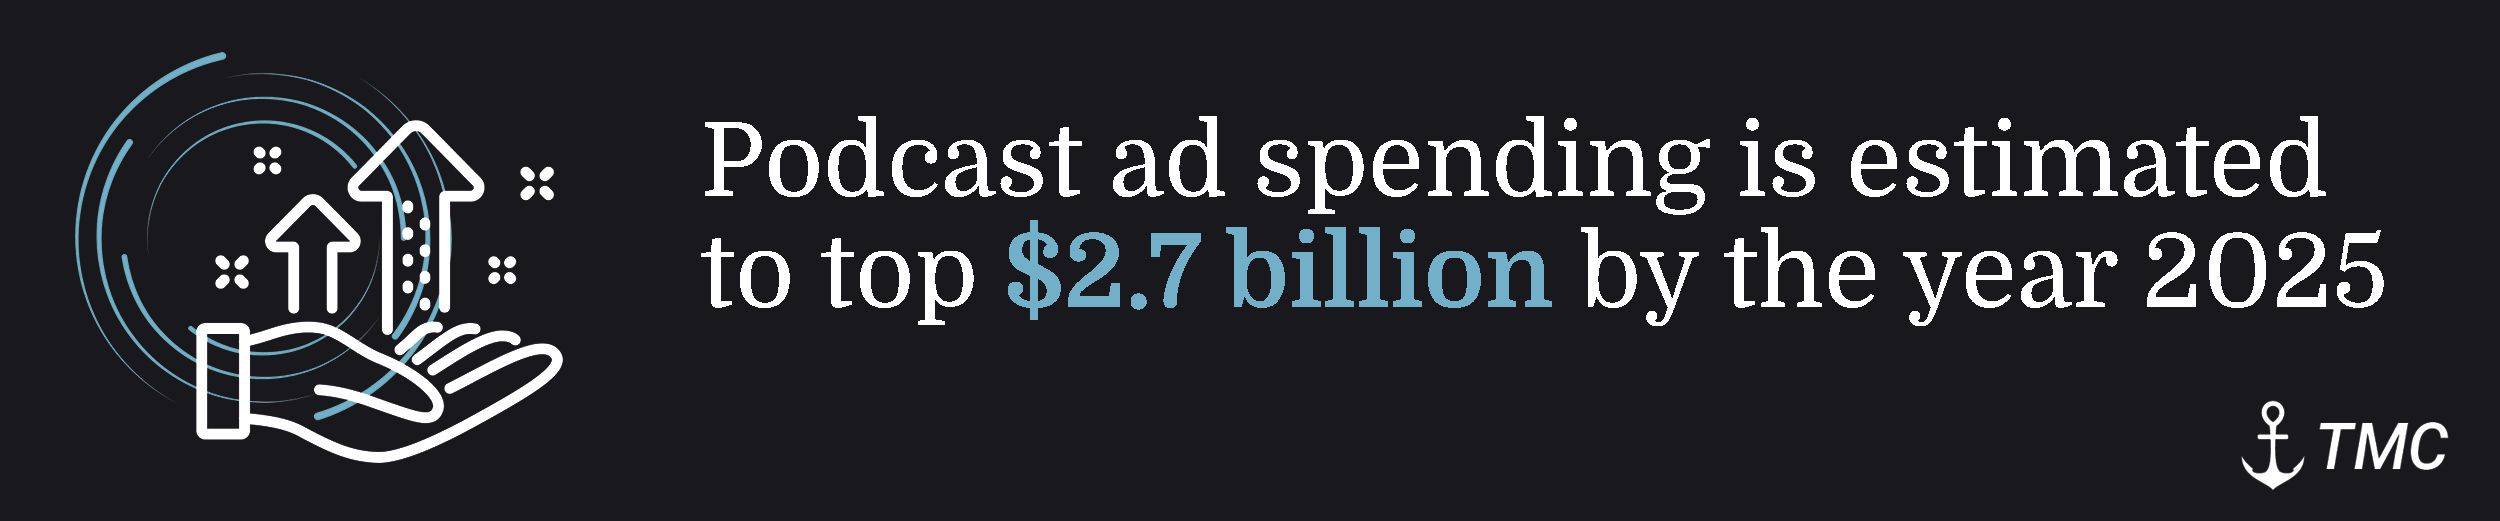 future-podcasting-advertising-spend